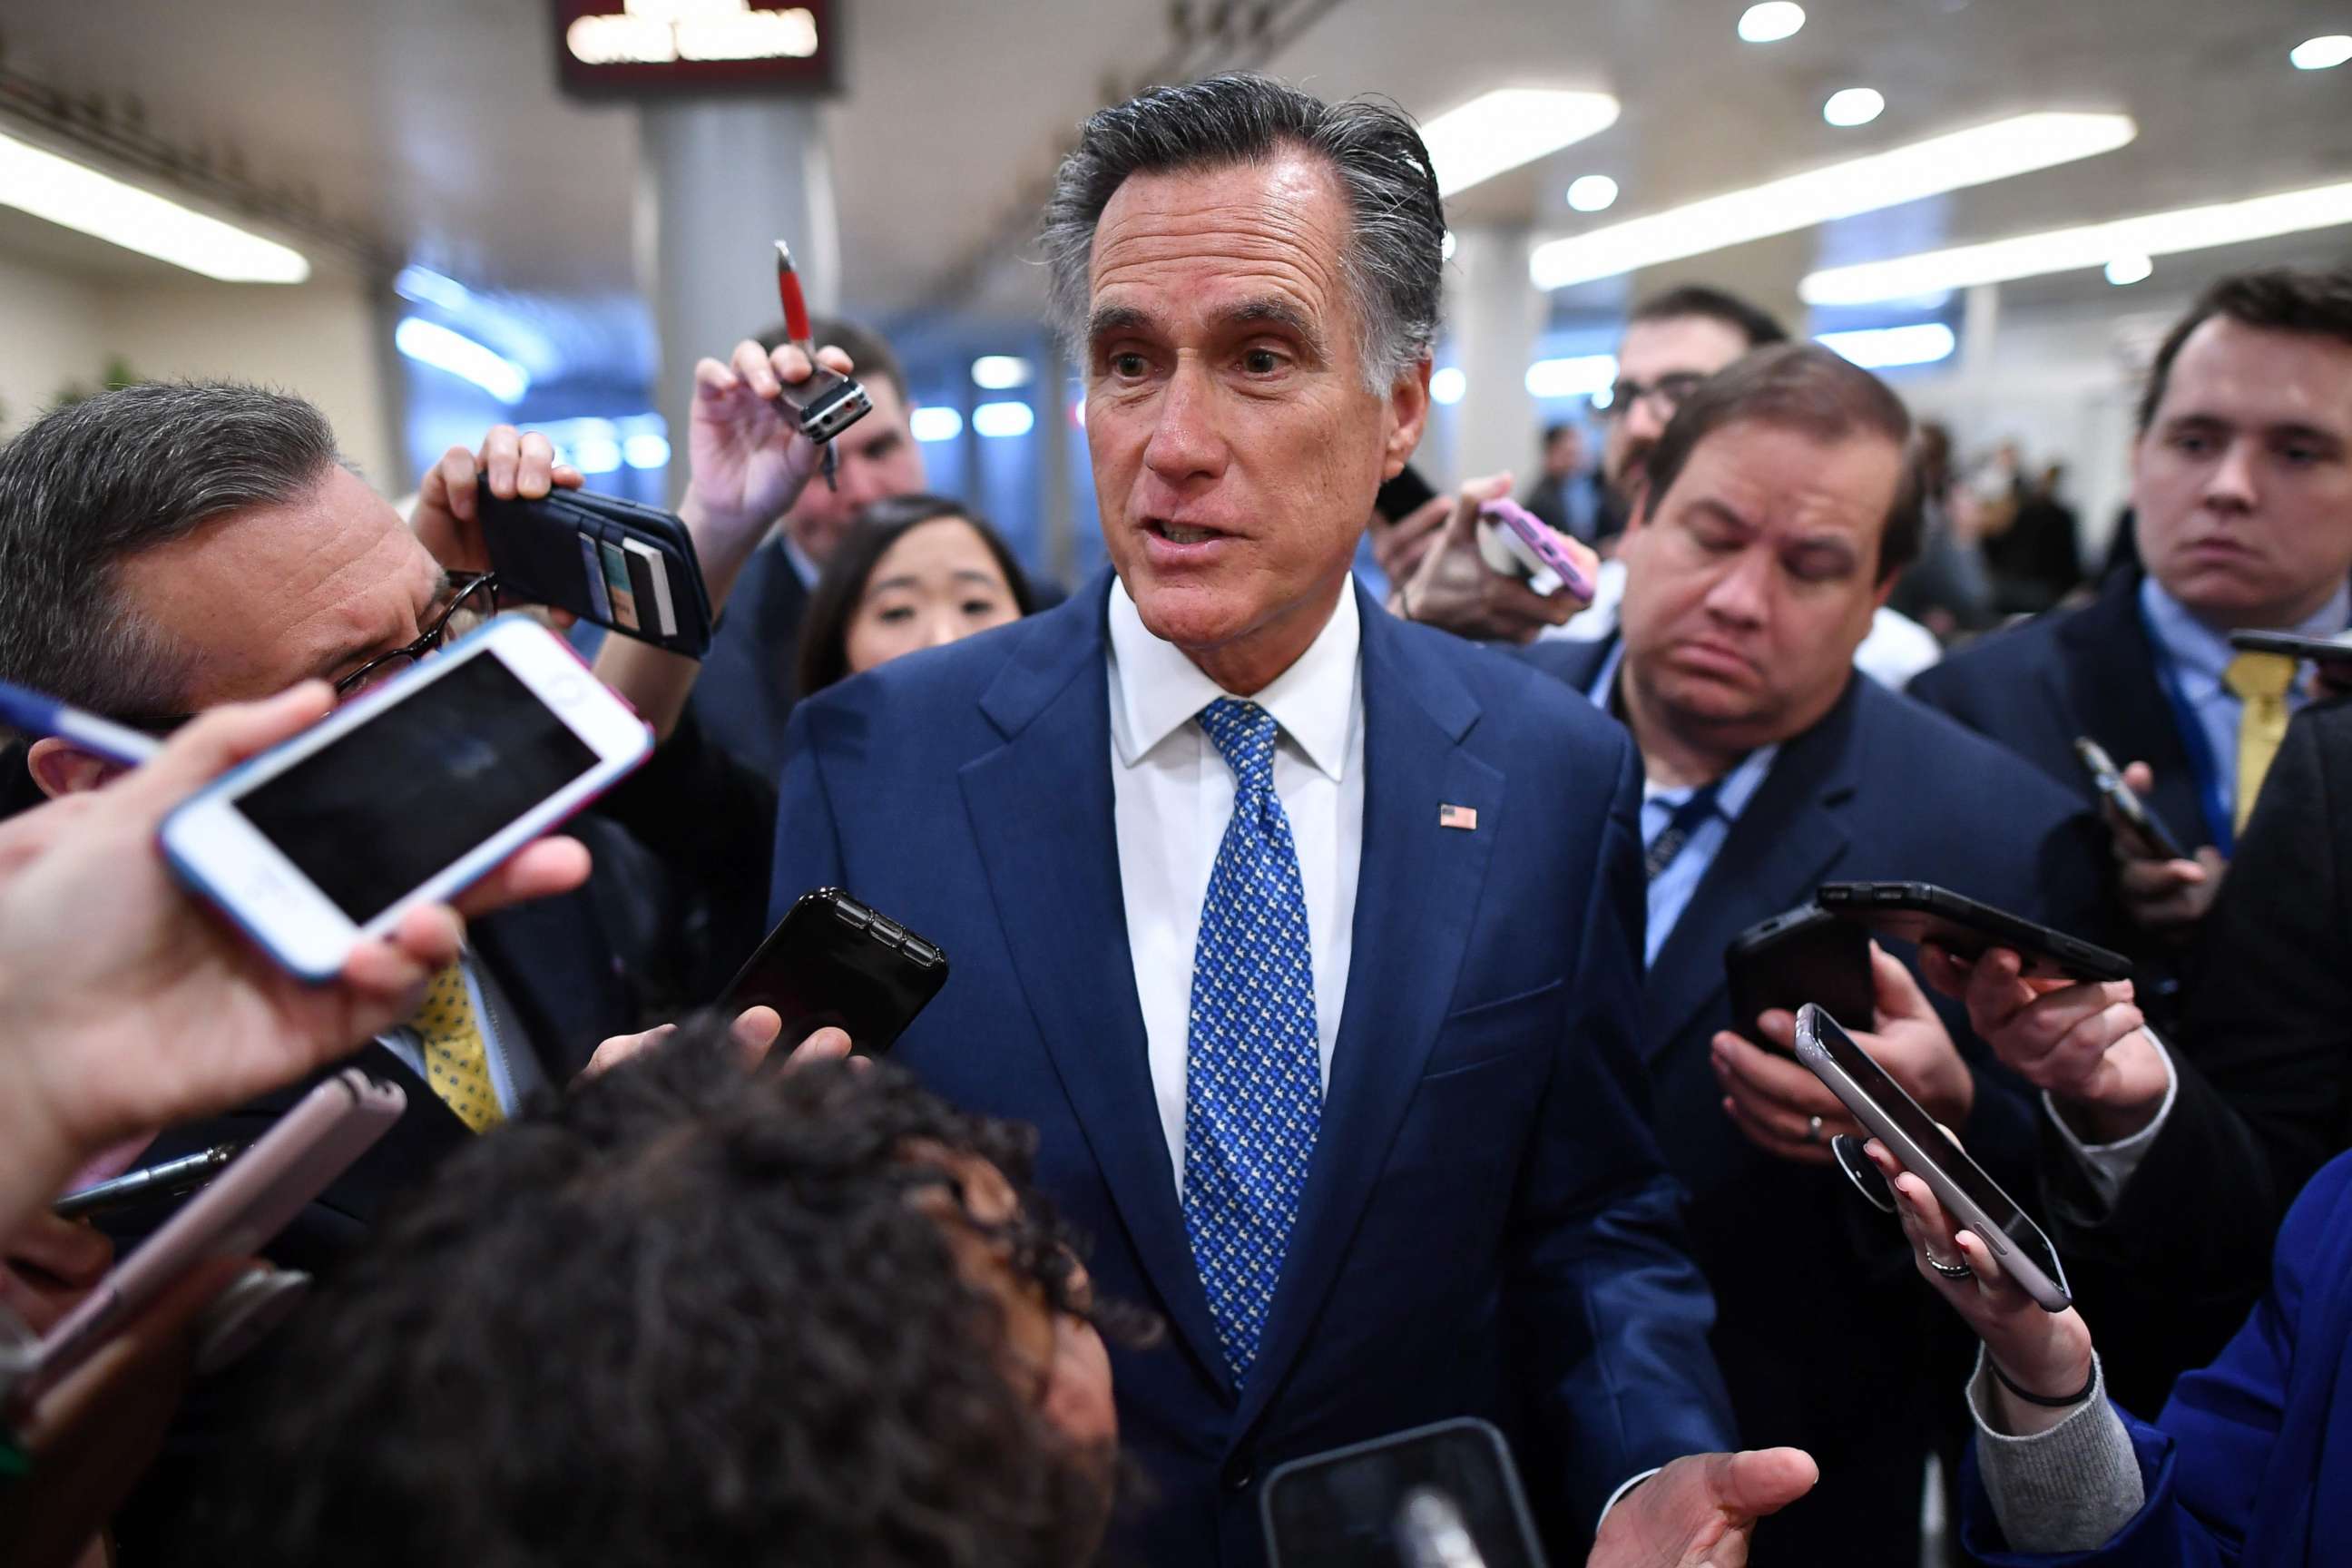 PHOTO: Senator Mitt Romney speaks to the media as he arrives during the impeachment trial of US President Donald Trump on Capitol Hill Jan. 29, 2020, in Washington, D.C.